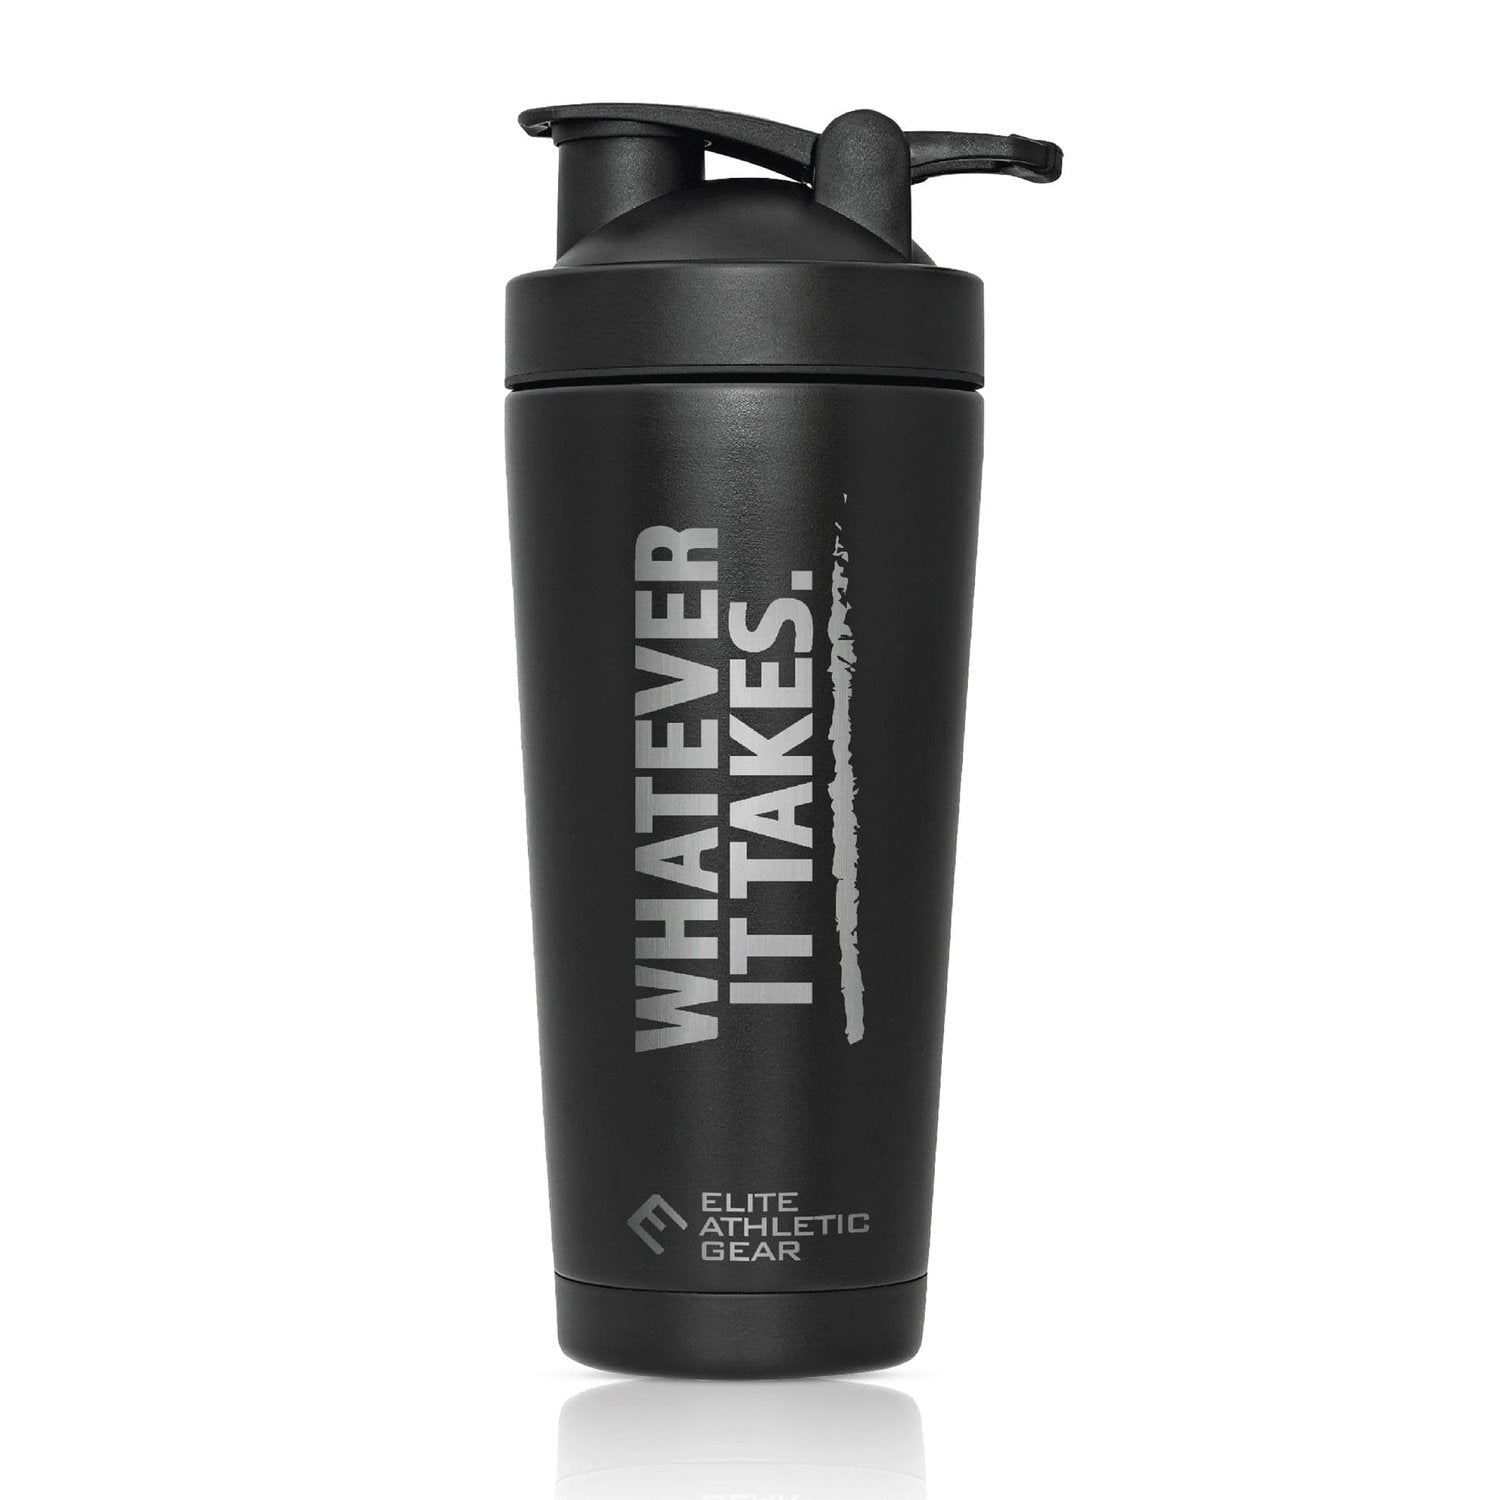 Elite Athletic Gear Whatever It Takes Shaker Cup kaufen bei HighPowered.ch